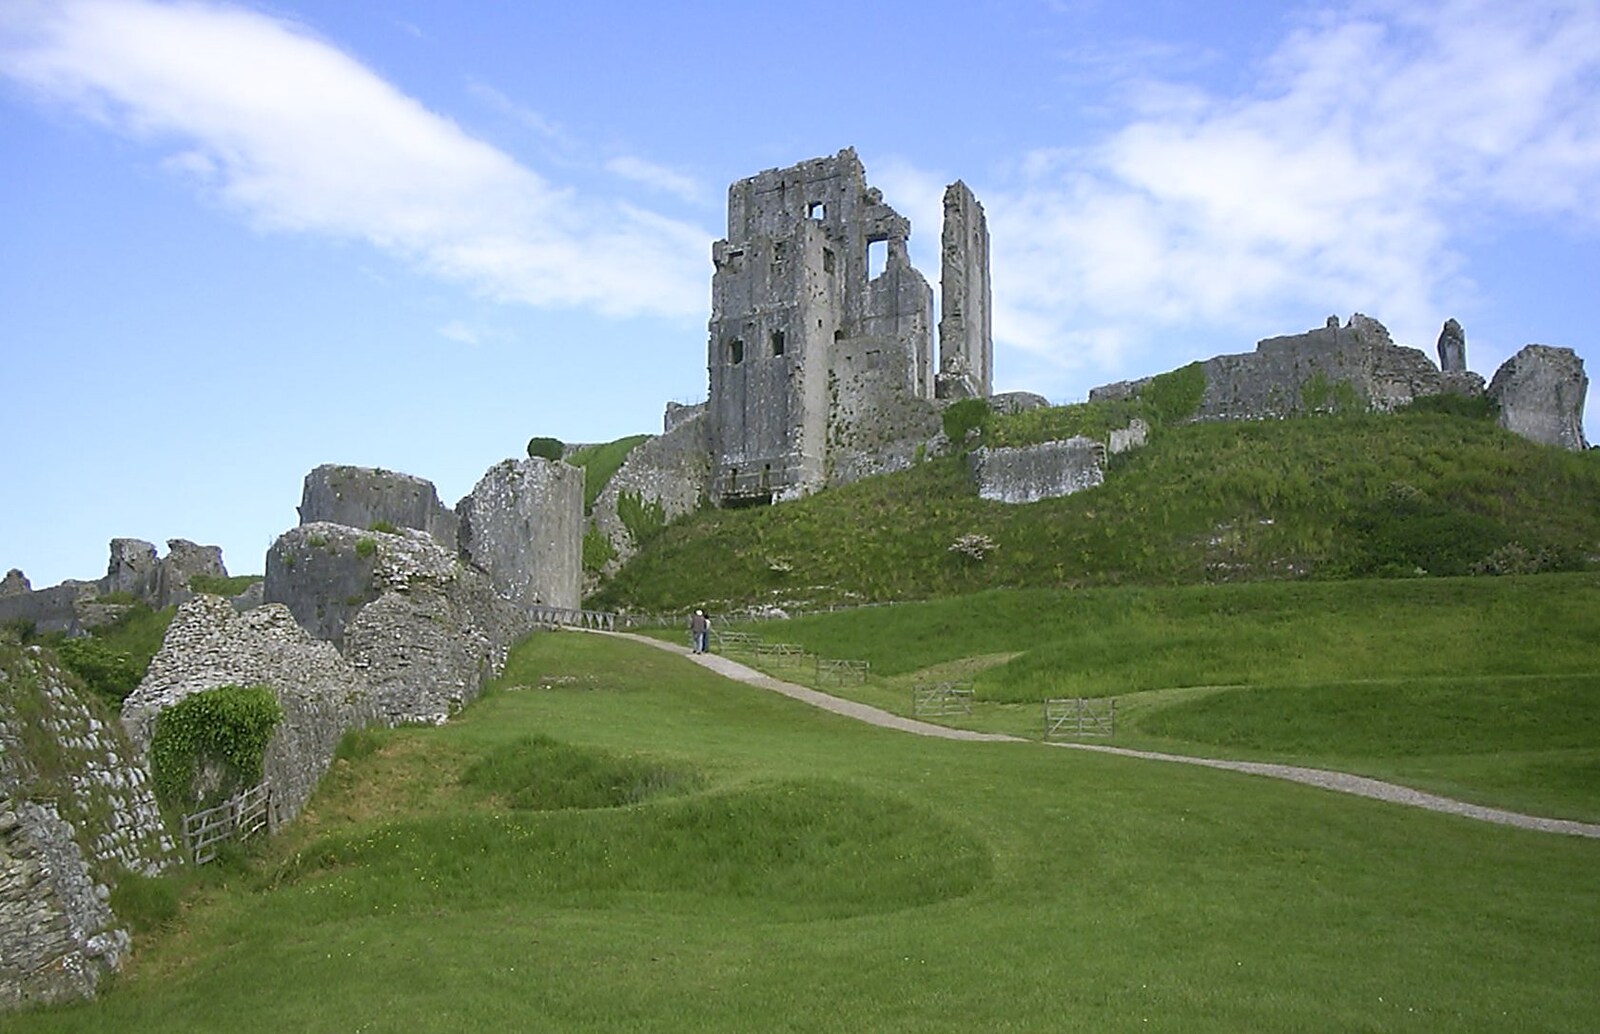 Corfe Castle Camping, Corfe, Dorset - 30th May 2004: The castle has just opened, so it's very quiet